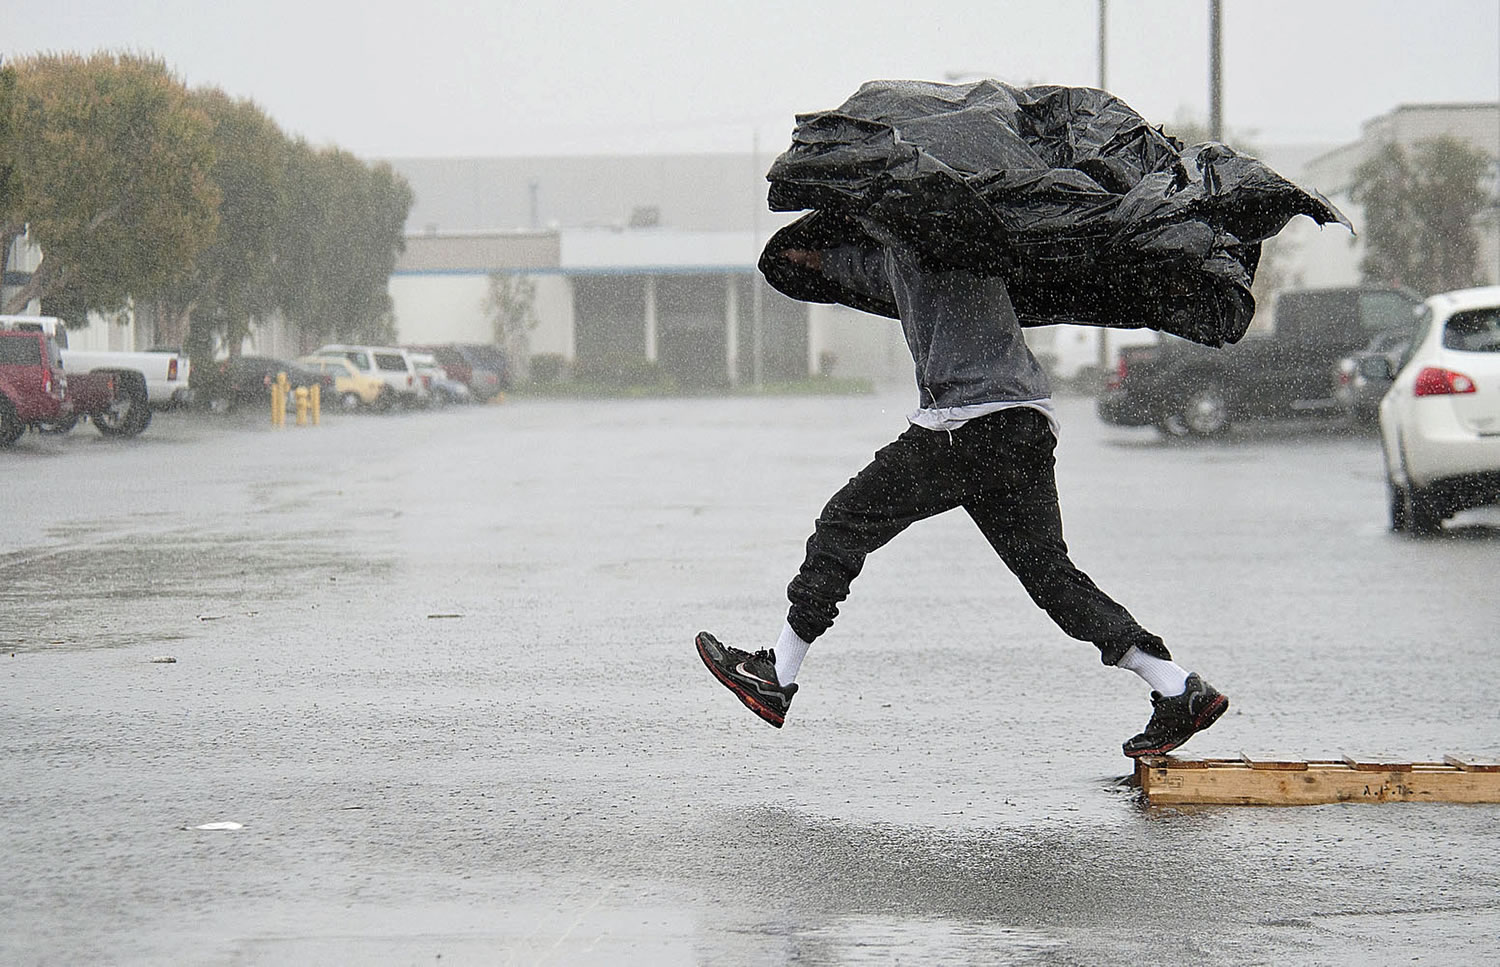 Assembly worker Terry Young, 24, of Rialto, Calif., uses a sheet of plastic to protect himself from a downpour Friday in Anaheim, Calif.